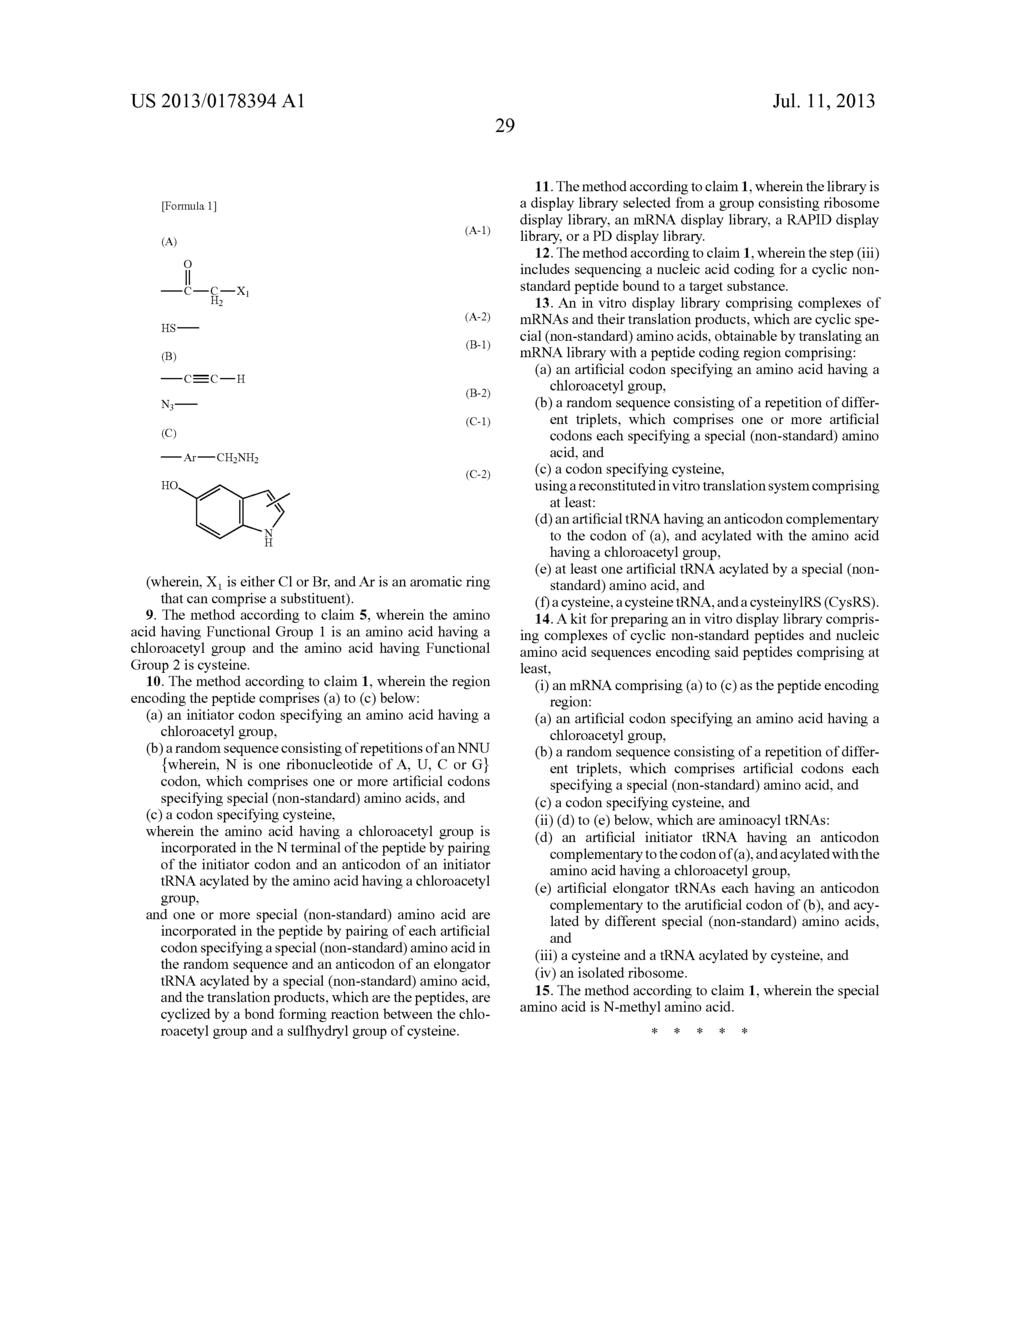 METHOD FOR CONSTRUCTING LIBRARIES OF NON-STANDARD PEPTIDE COMPOUNDS     COMPRISING N-METHYL AMINO ACIDS AND OTHER SPECIAL (NON-STANDARD) AMINO     ACIDS AND METHOD FOR SEARCHING AND IDENTIFYING ACTIVE SPECIES - diagram, schematic, and image 37